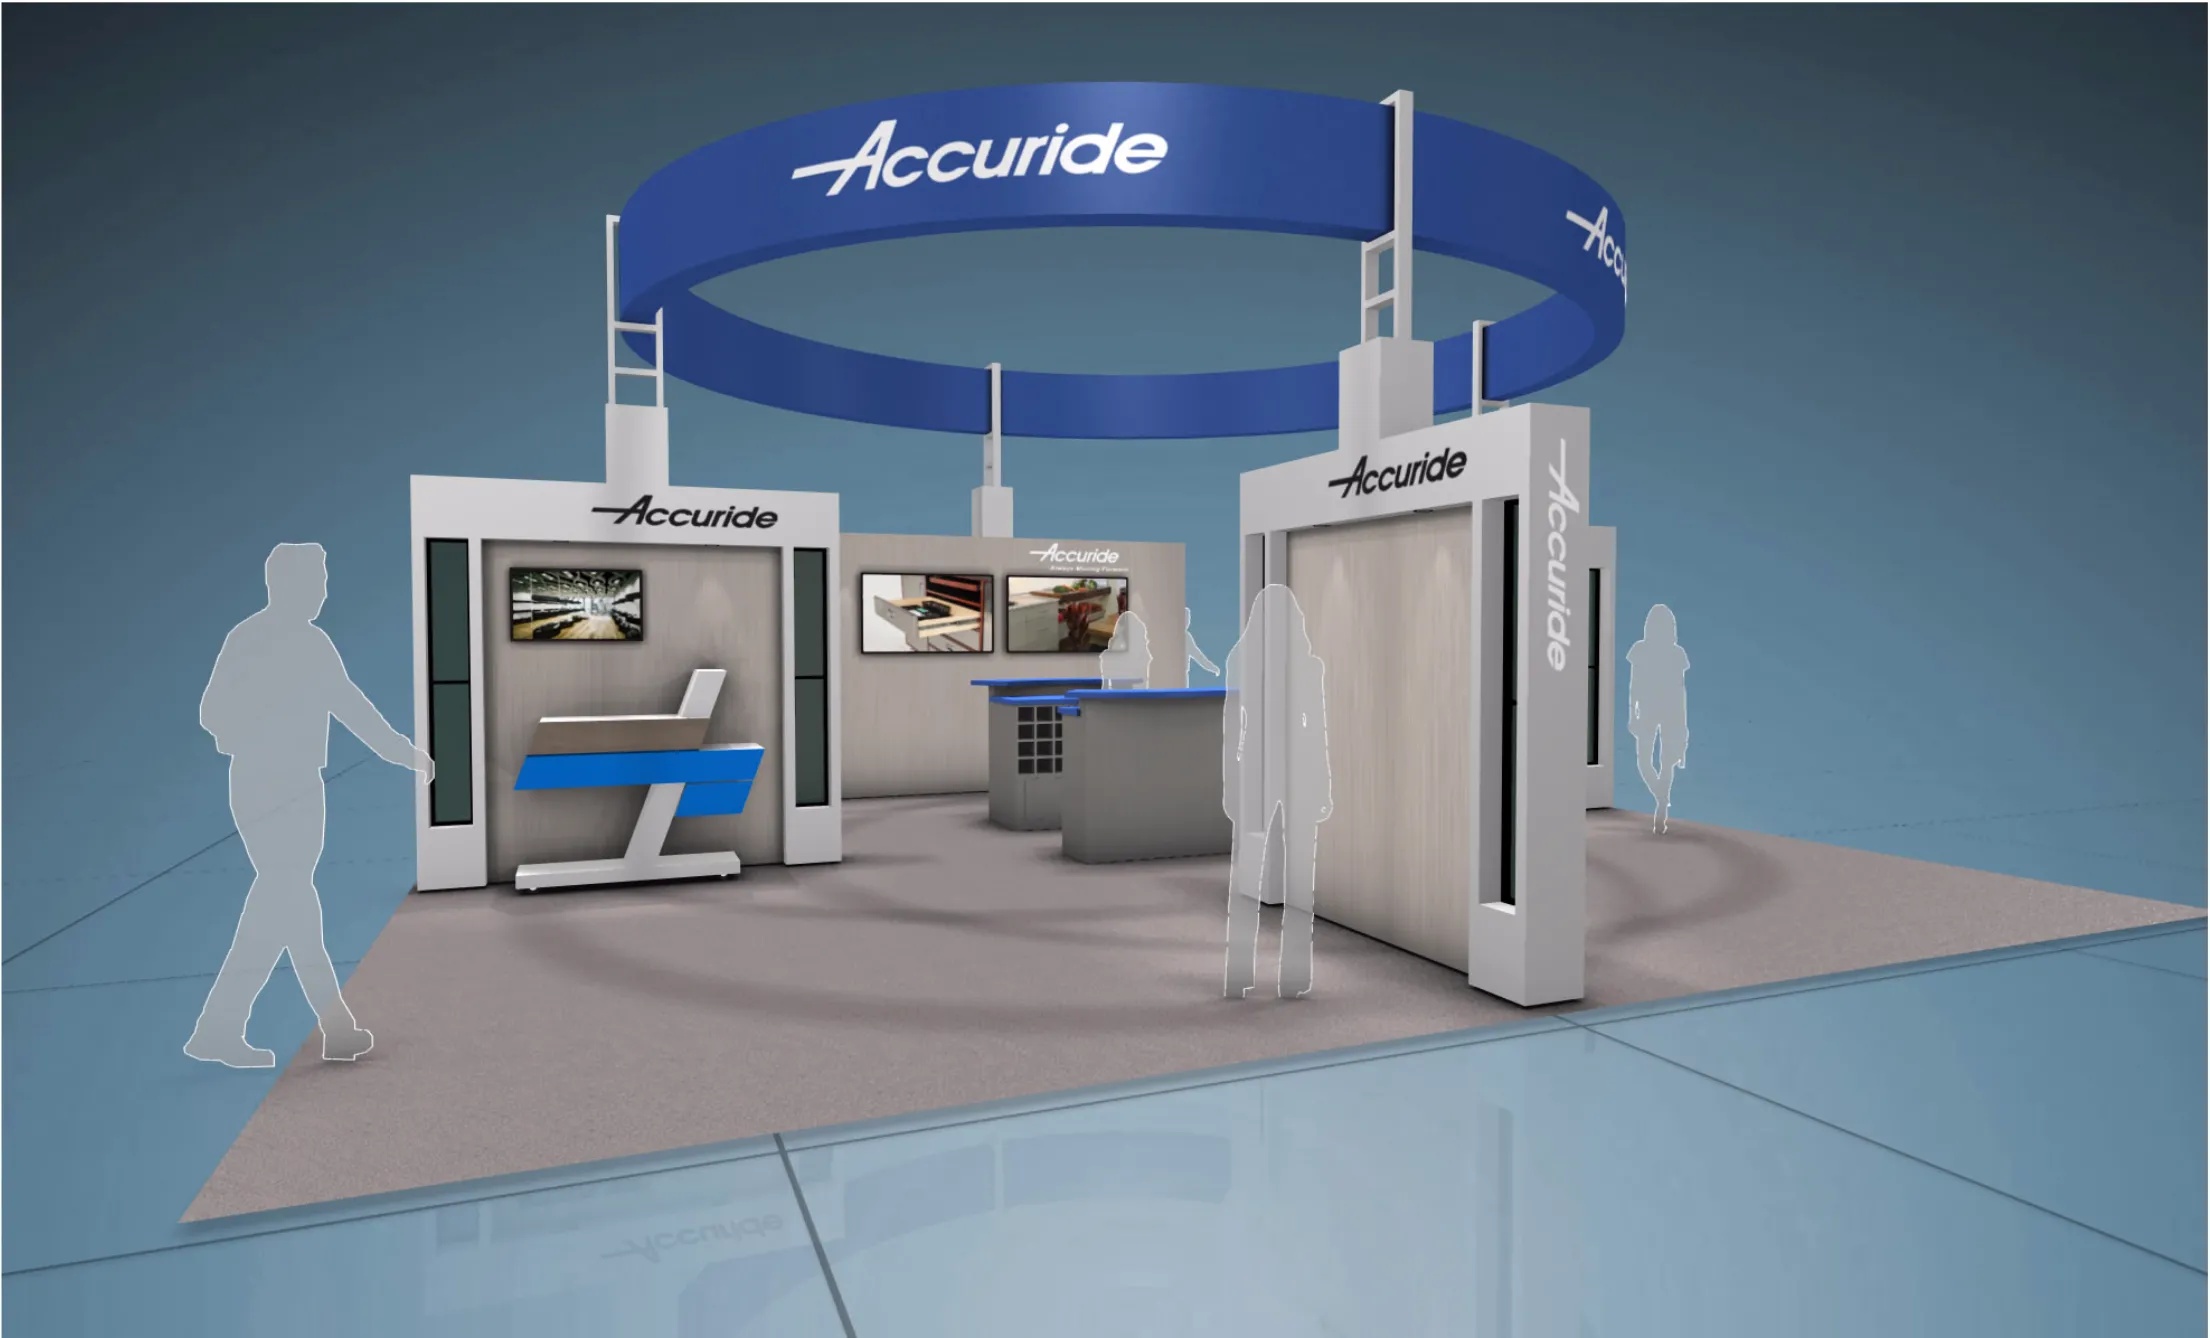 Accuride-Show-Booth-design-@AWFS2017.png.webp